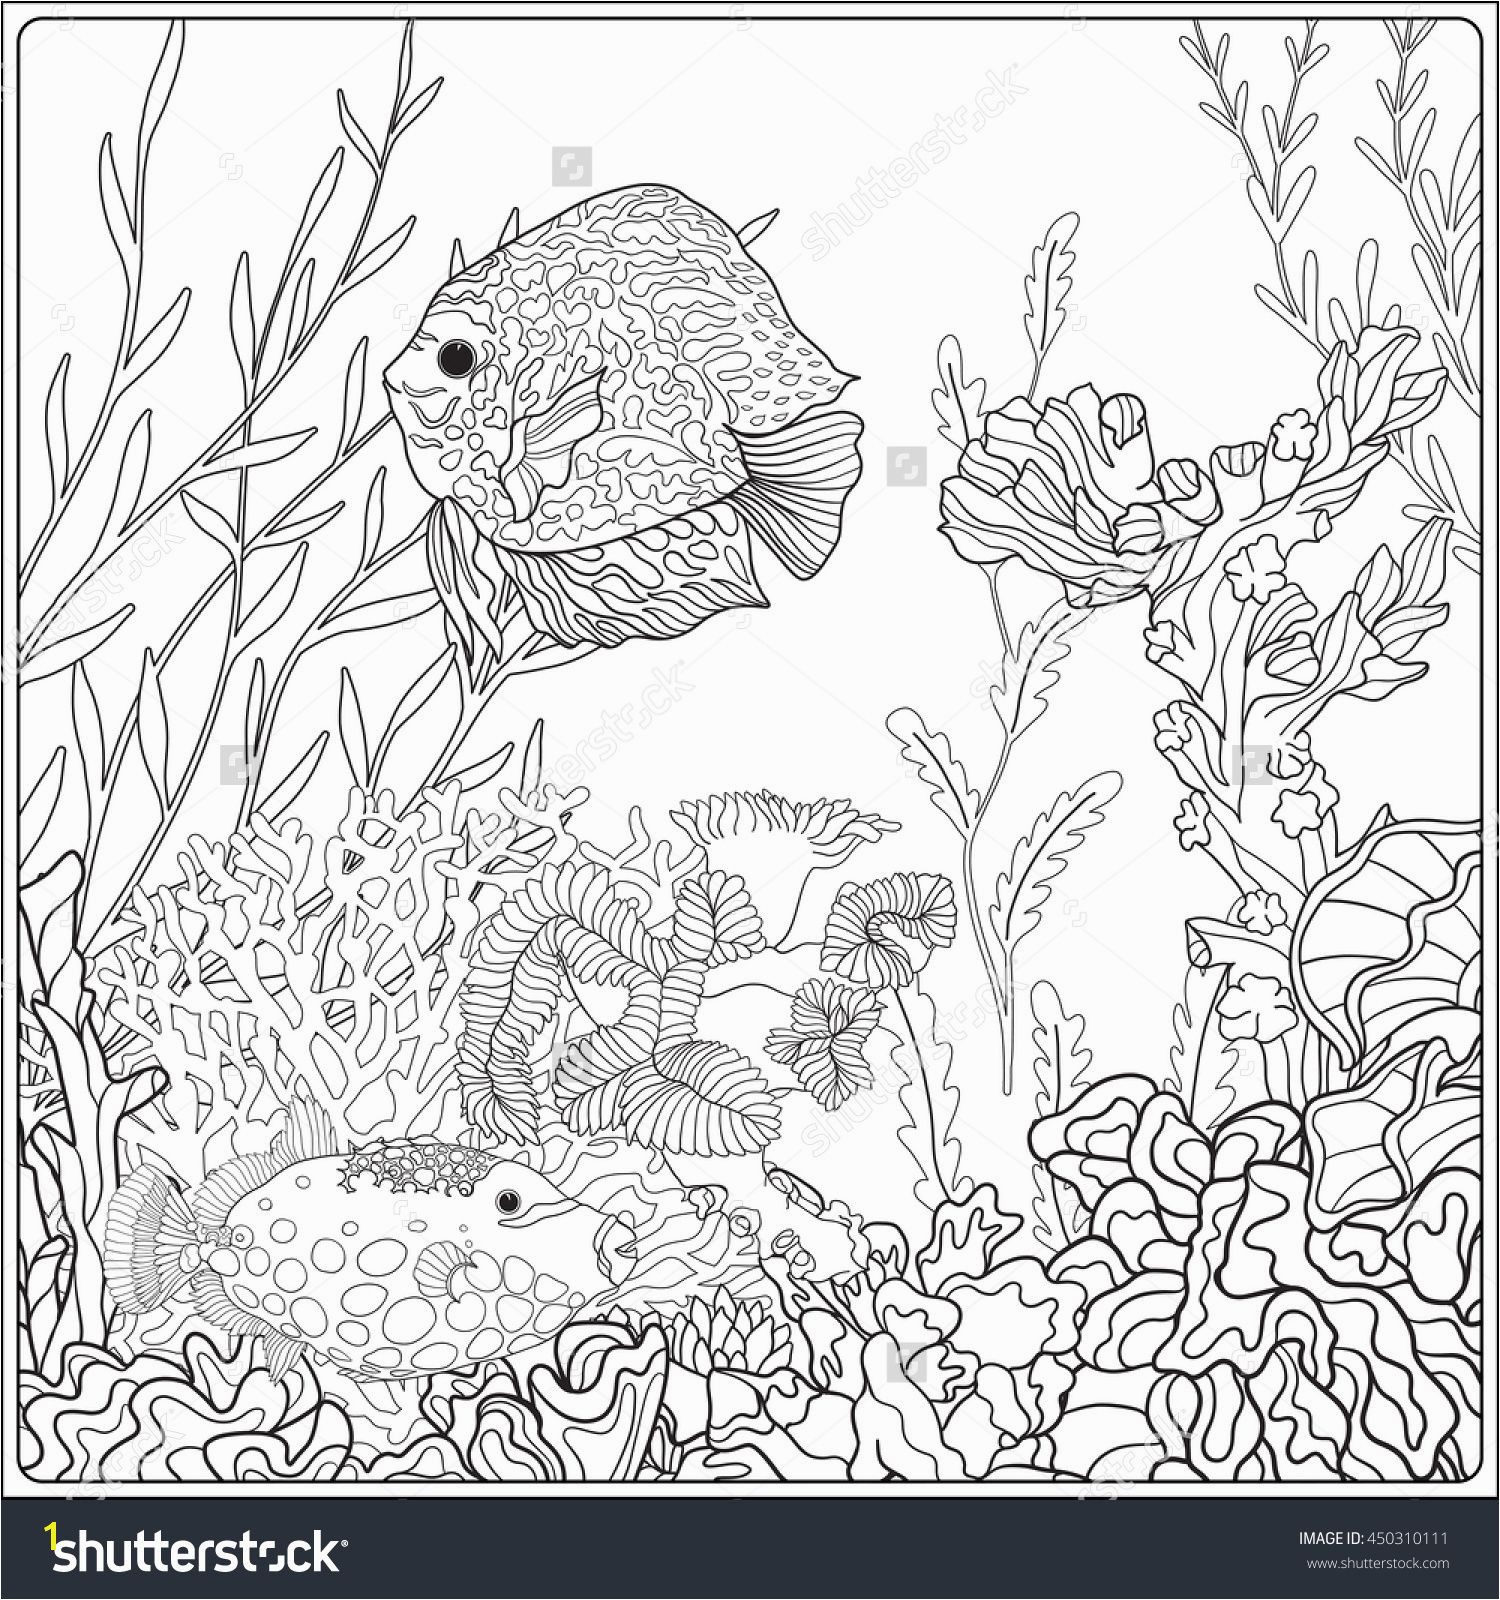 Adult coloring book Coloring page with underwater world coral reef Corals fish and seaweeds Outline vector illustration